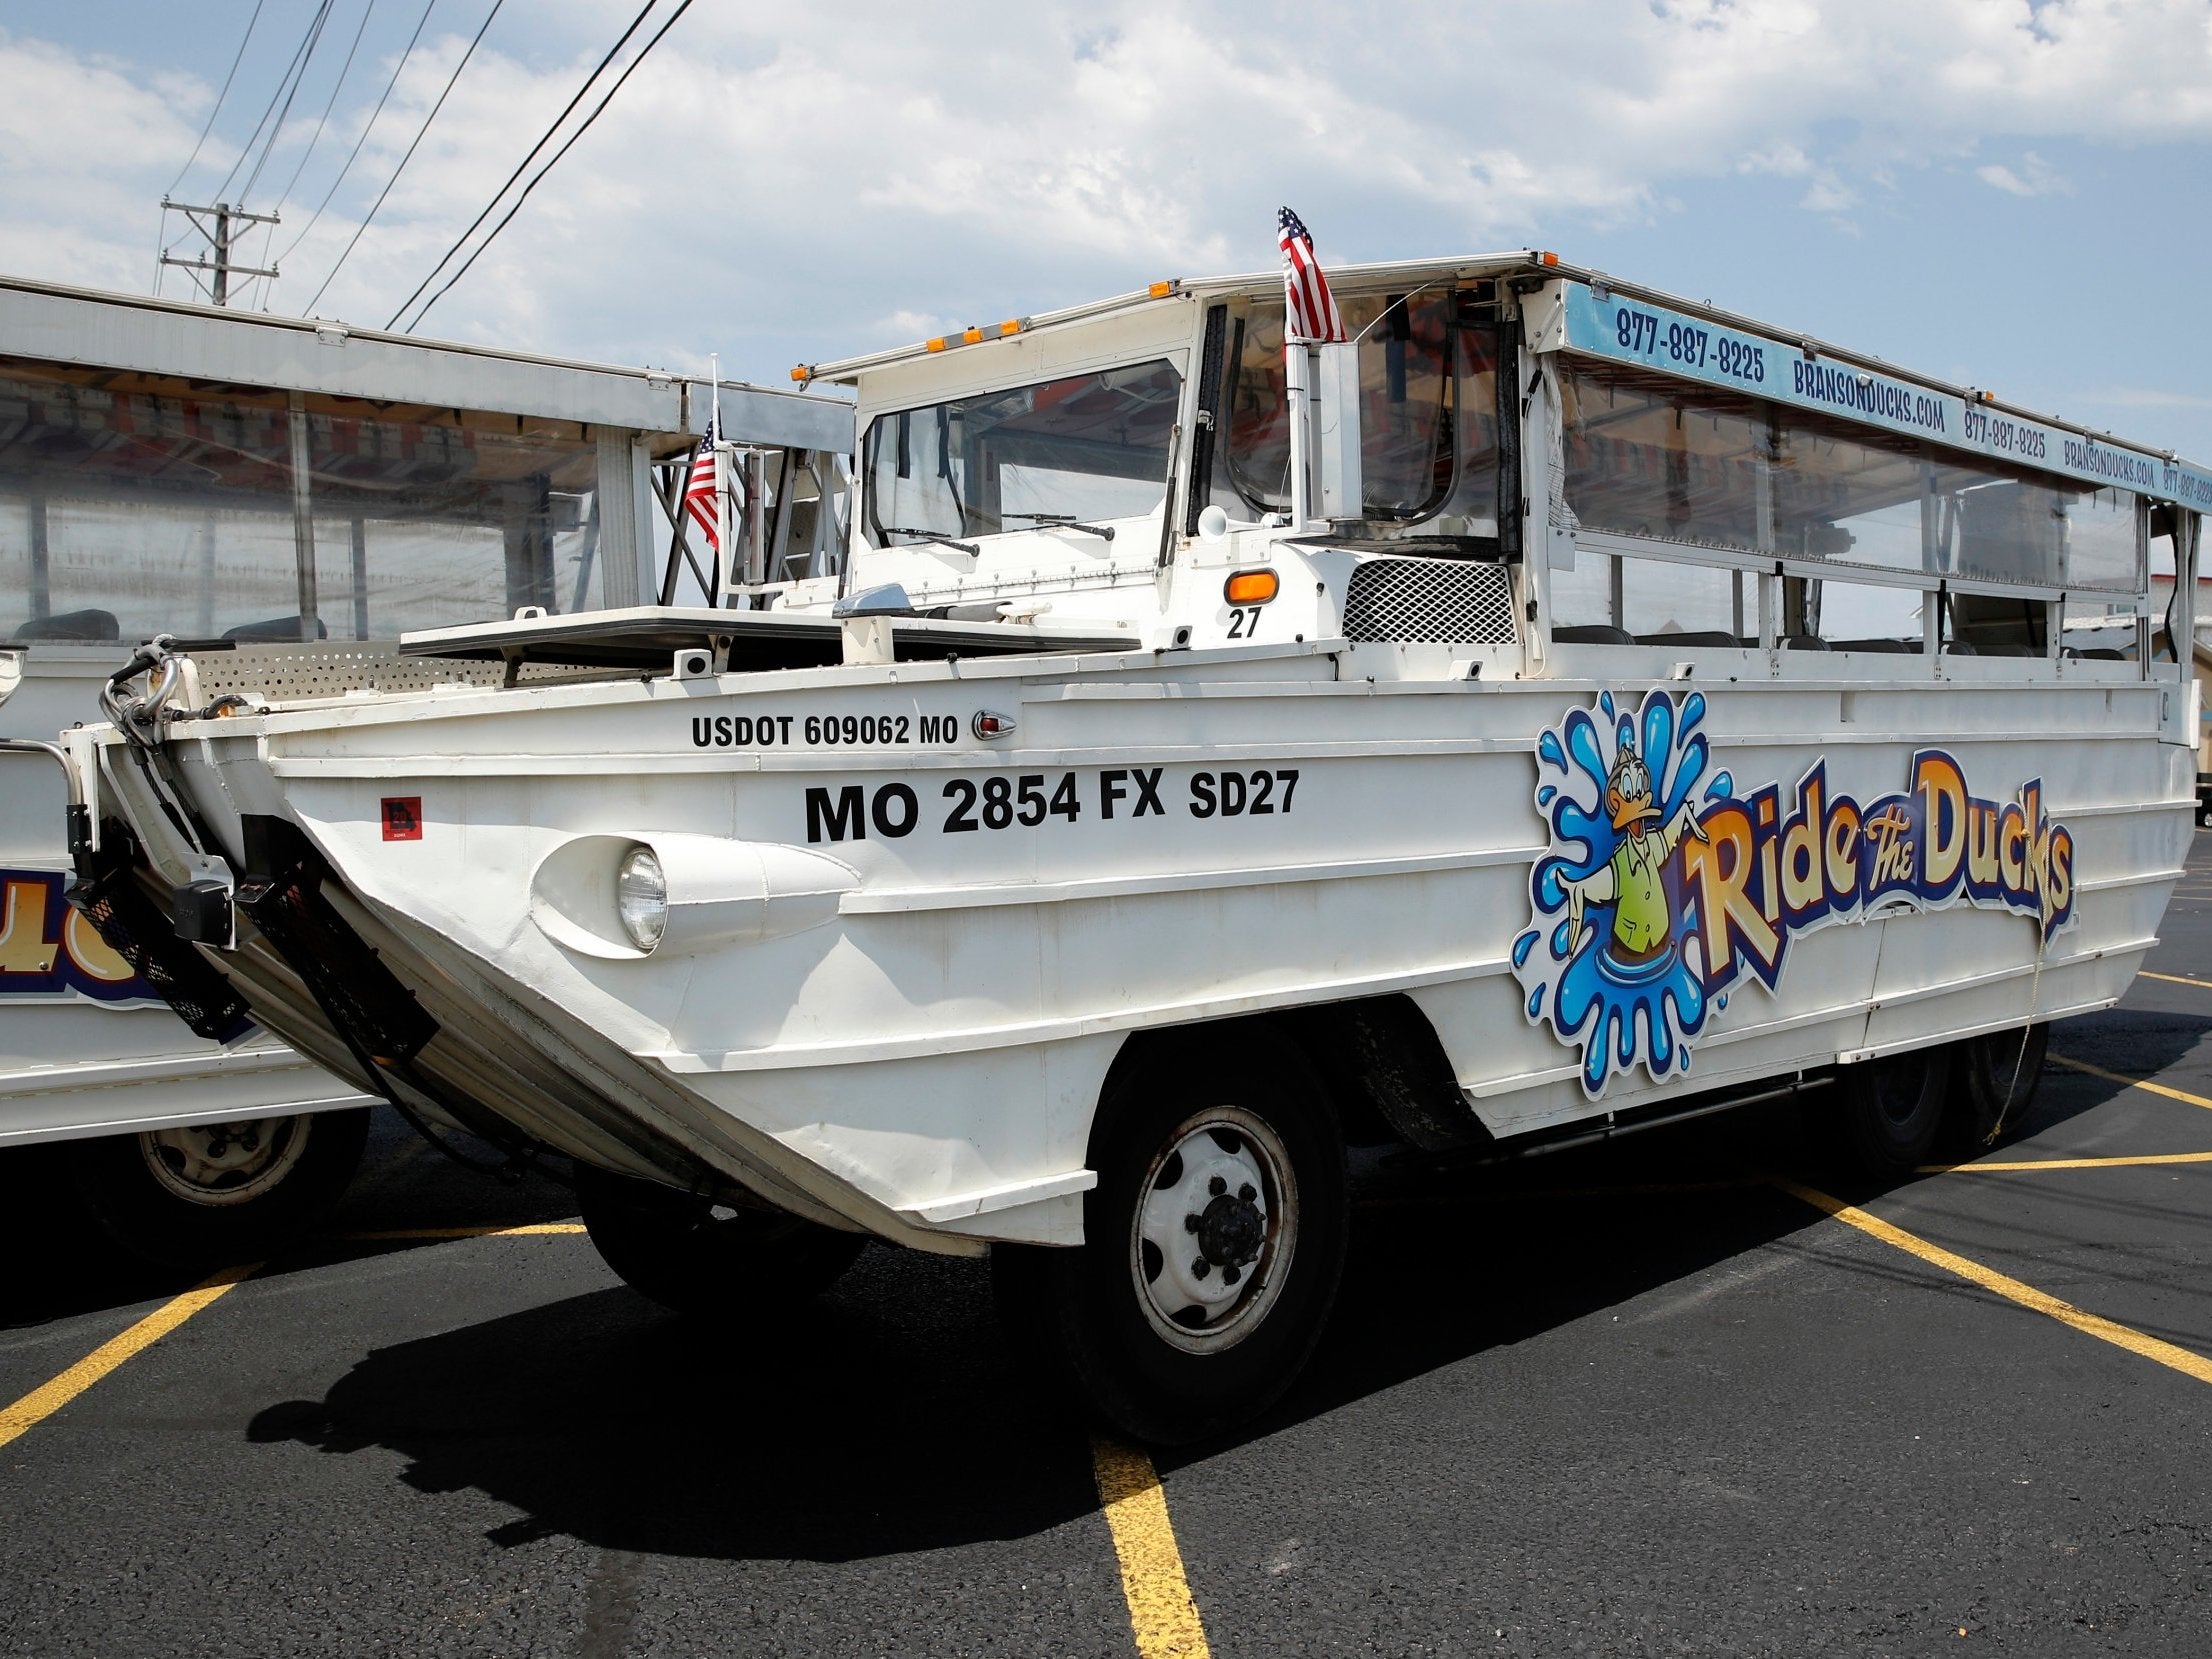 Missouri Duck Boat Crash Family Of Victims From Capsizing Sue.